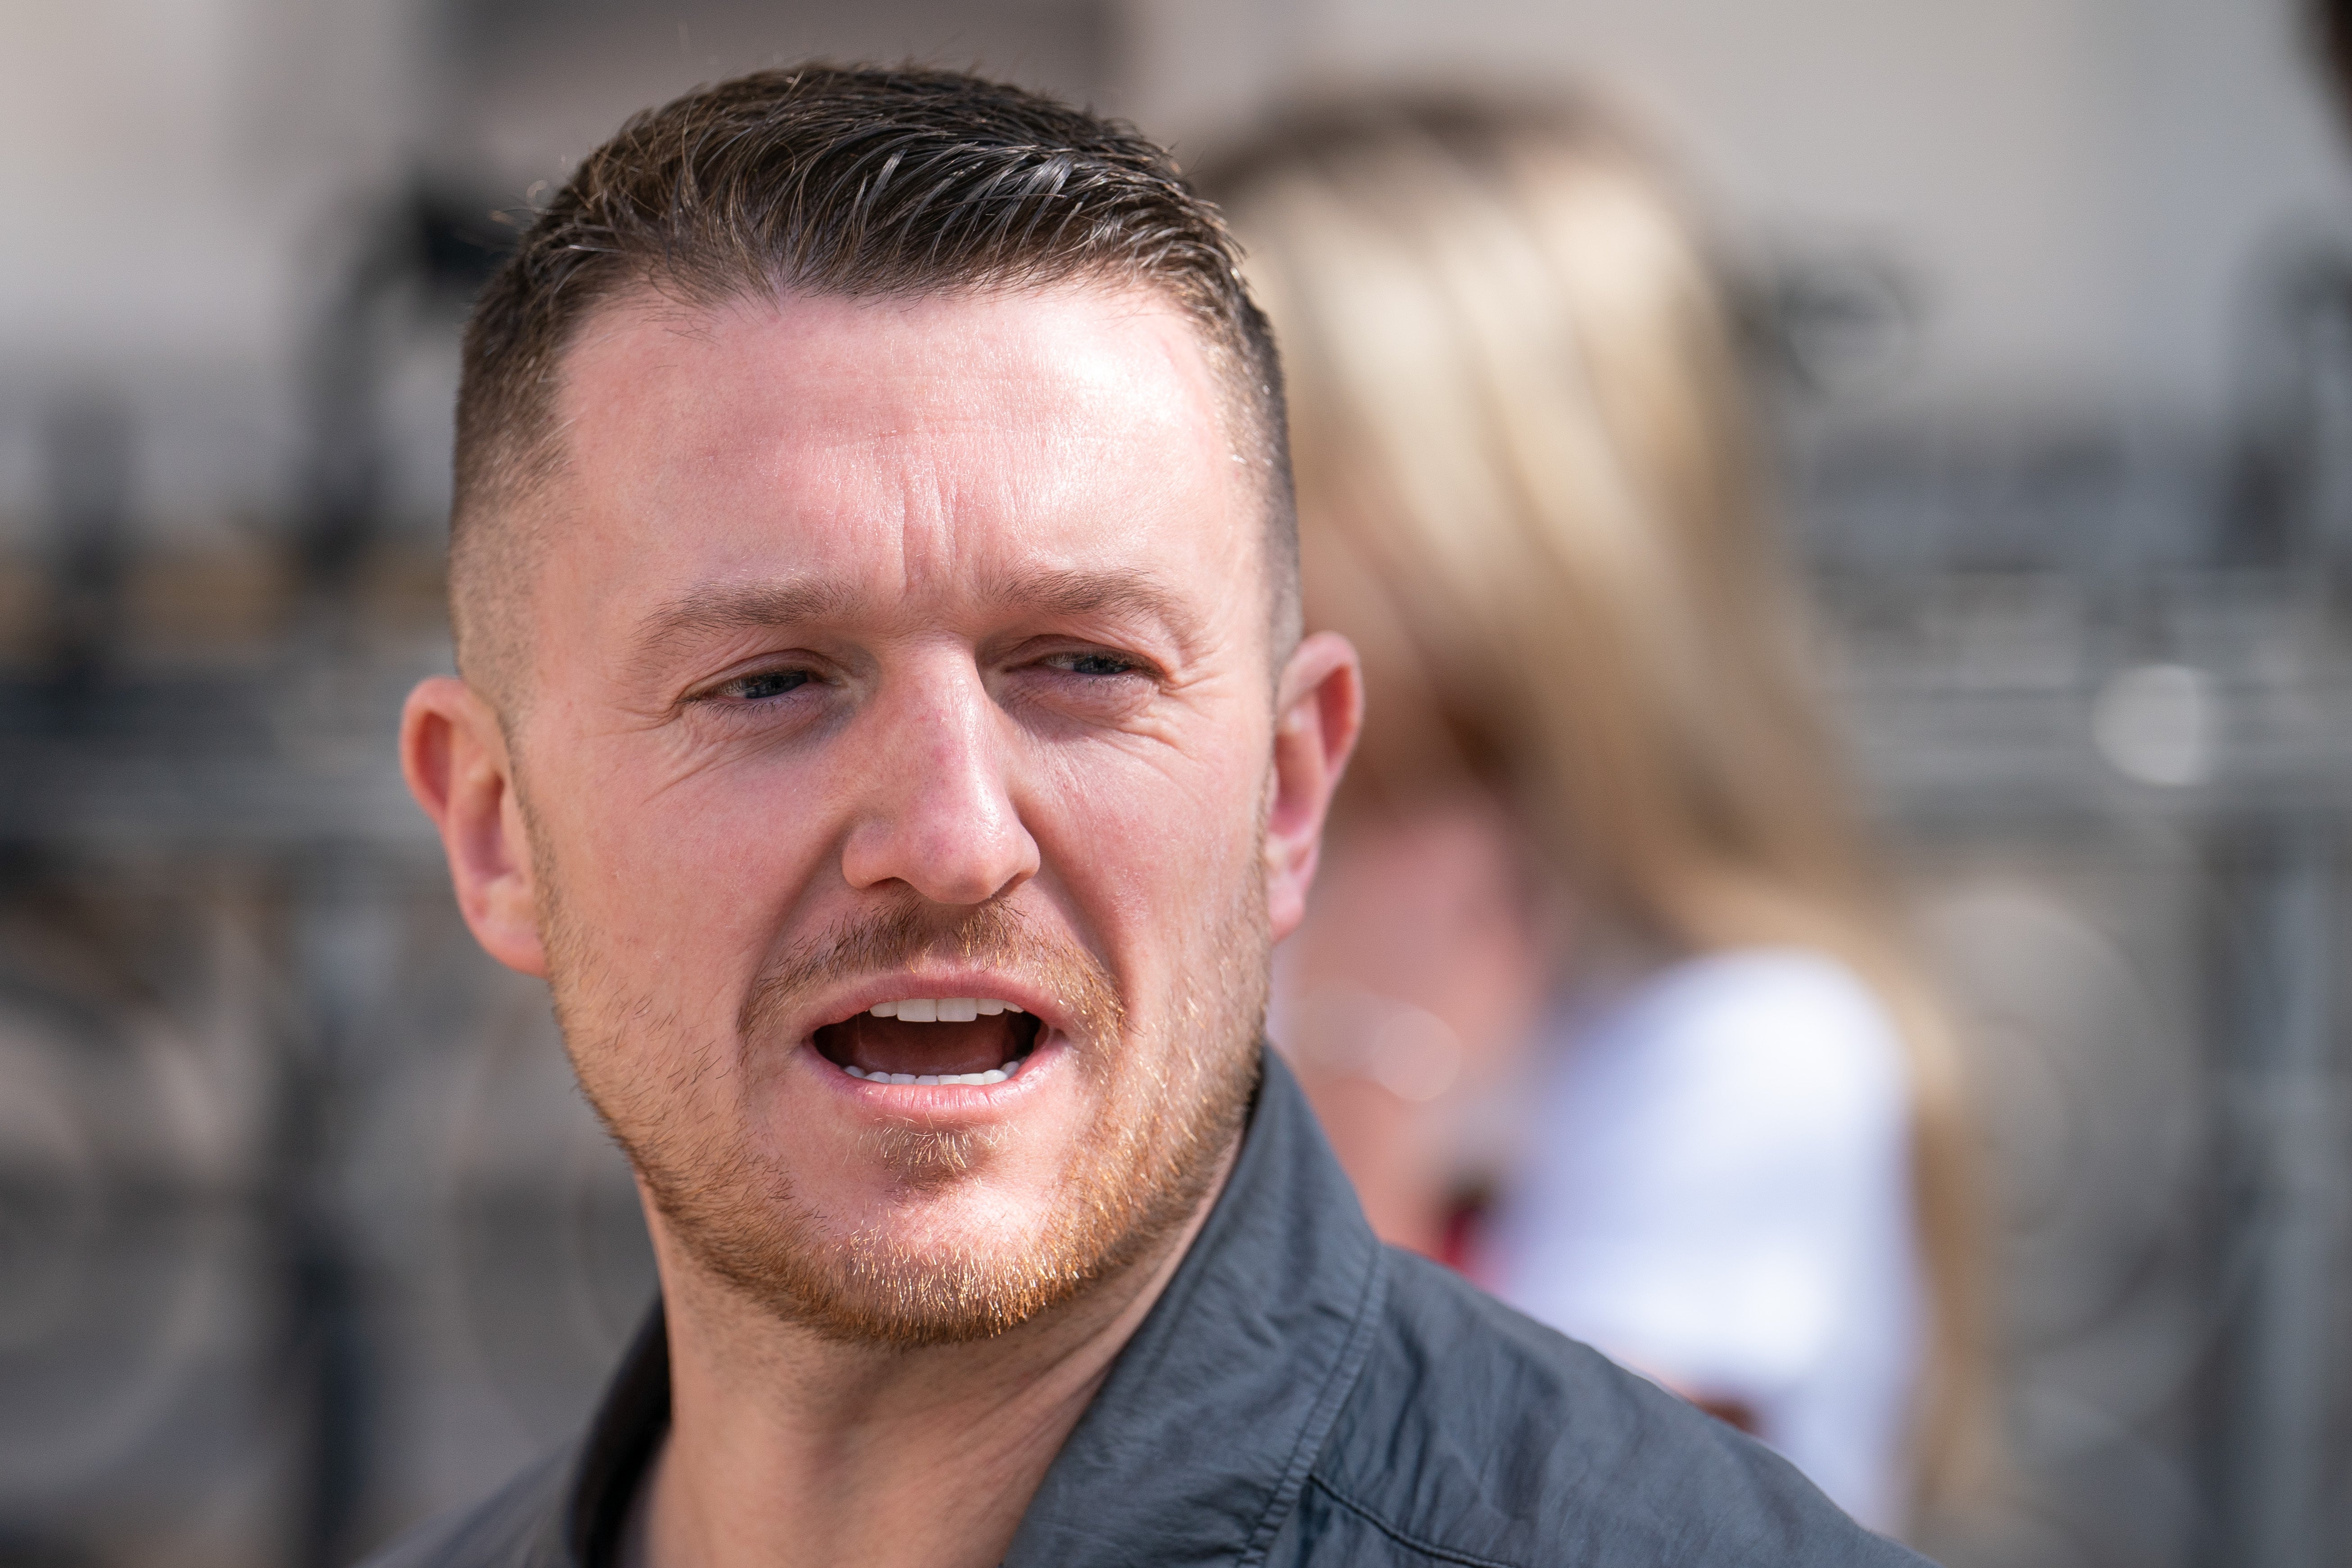 Tommy Robinson failed to appear in court on March 22